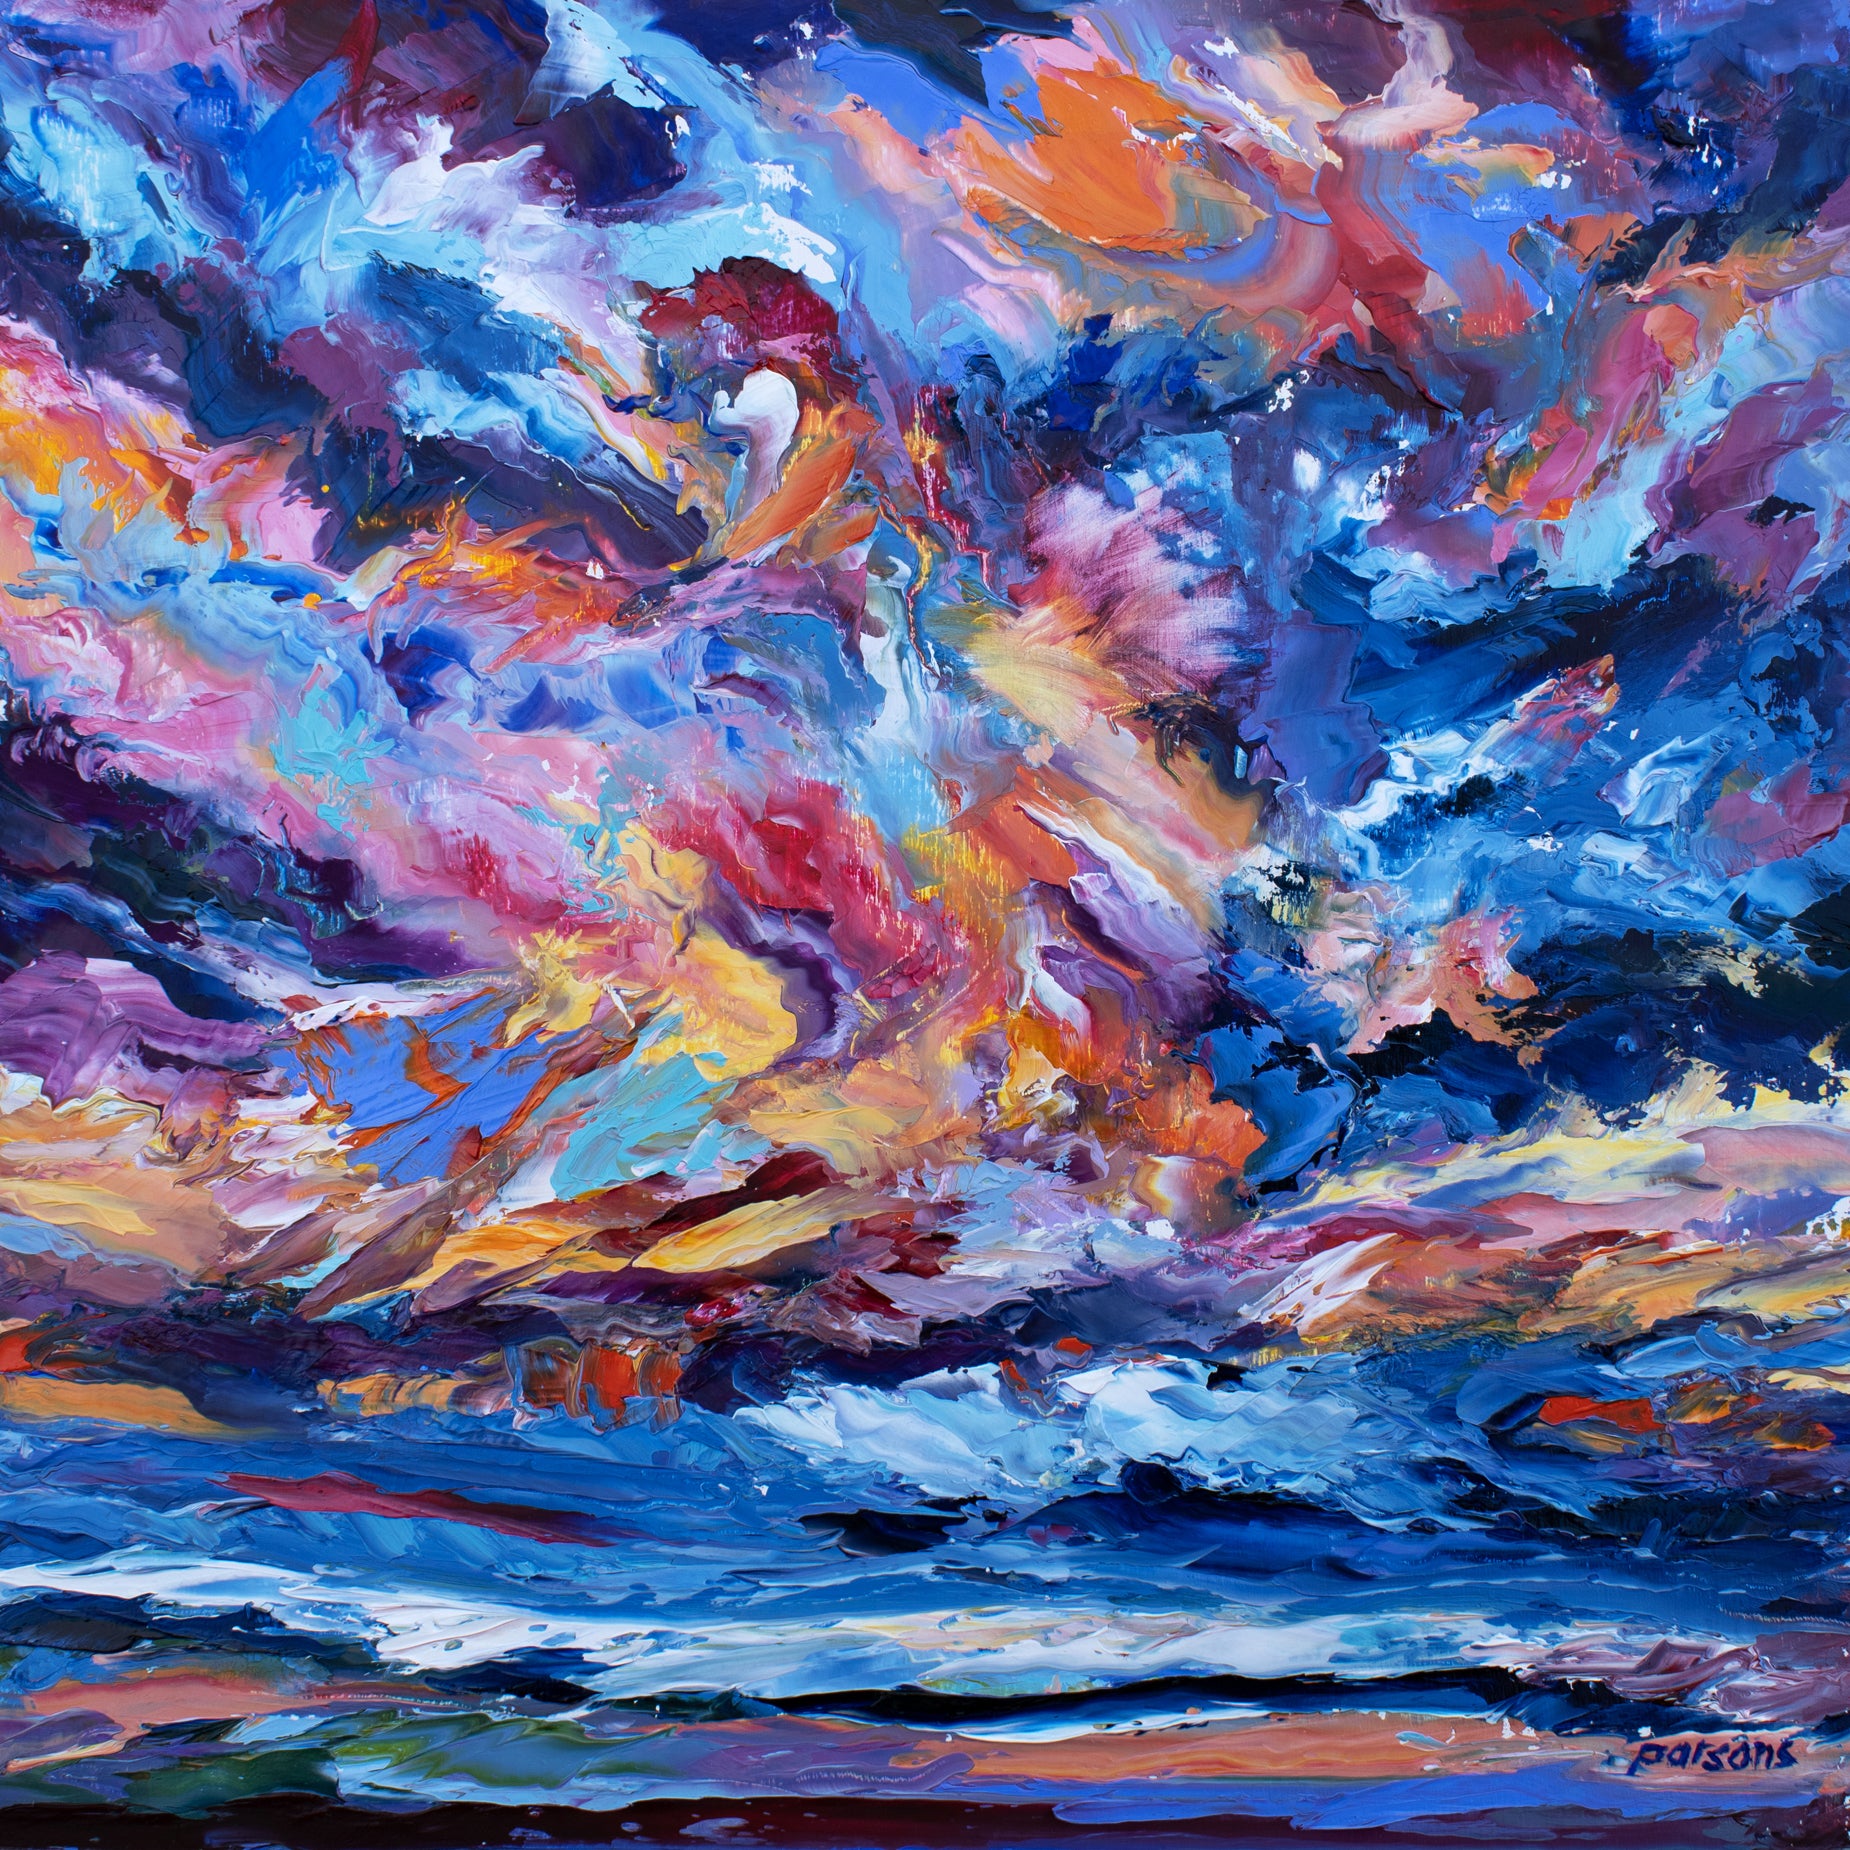 Dragon Sky. Original oil on panel painting. Abstract cloudscape. Seascape.